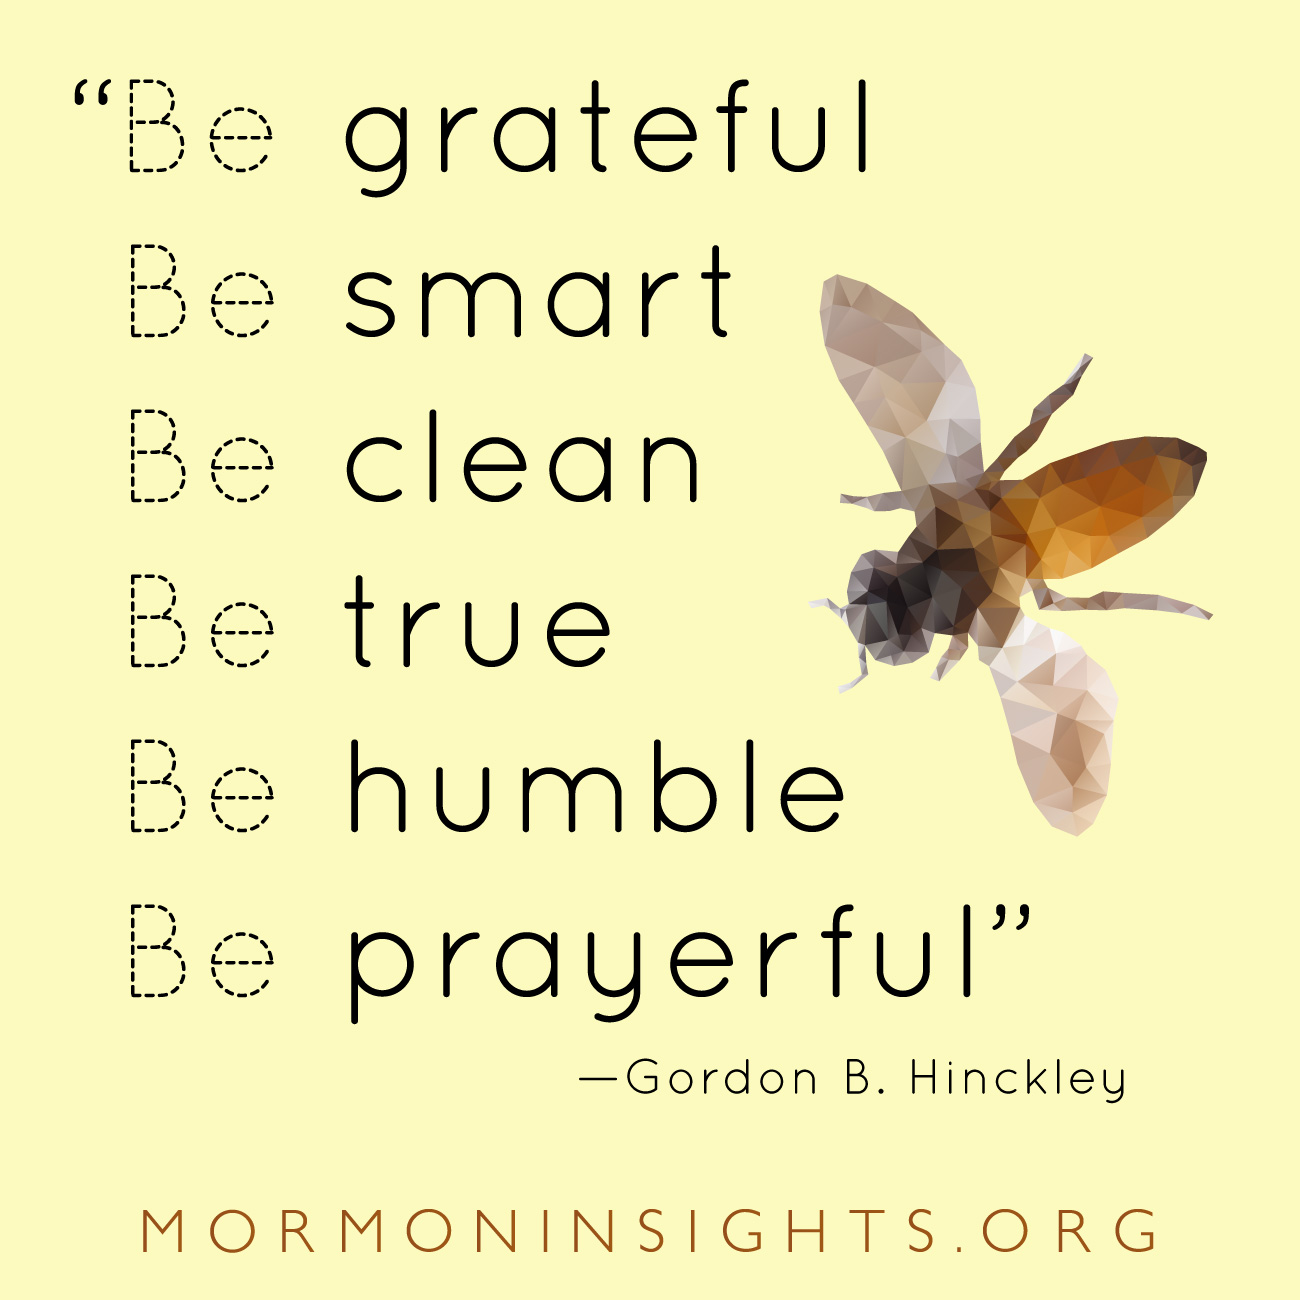 Yellow background with quote: be grateful, be smart, be clean, be true, be humble, be prayerful.